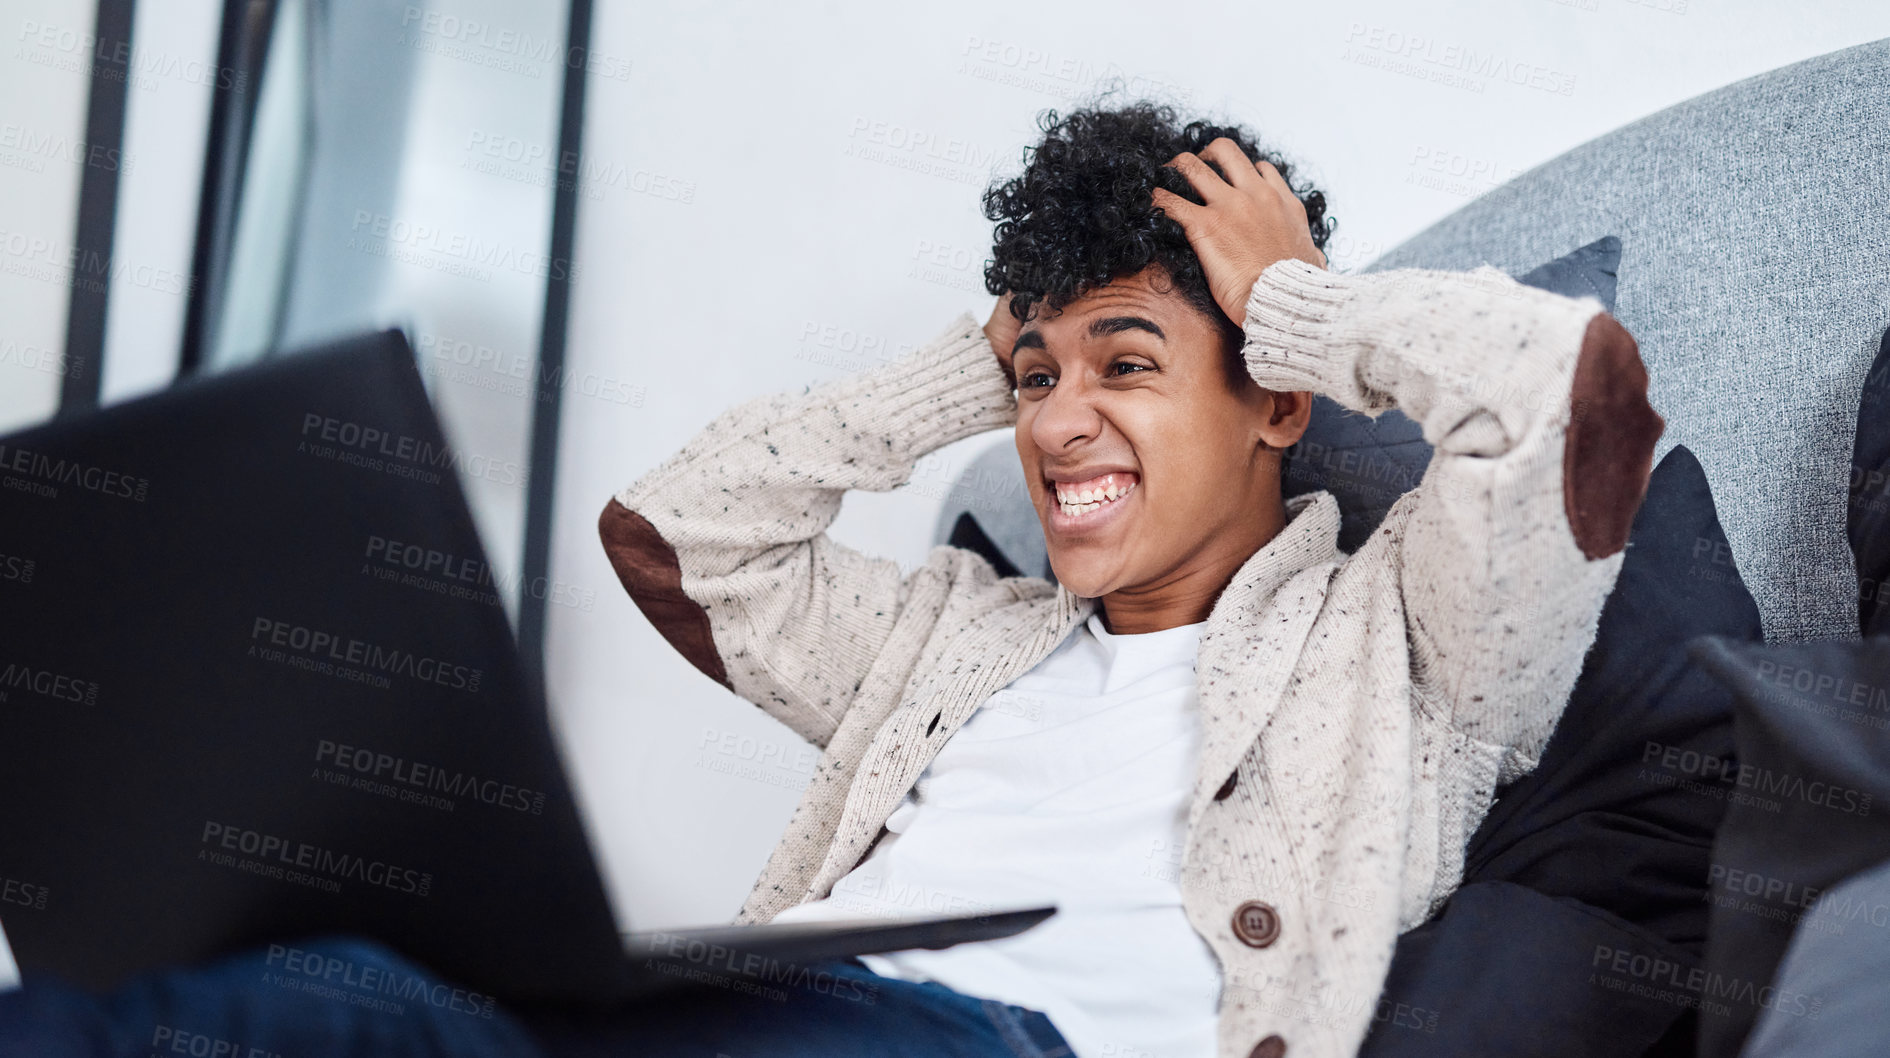 Buy stock photo Shot of a young man looking shocked while using a laptop on his bed at home